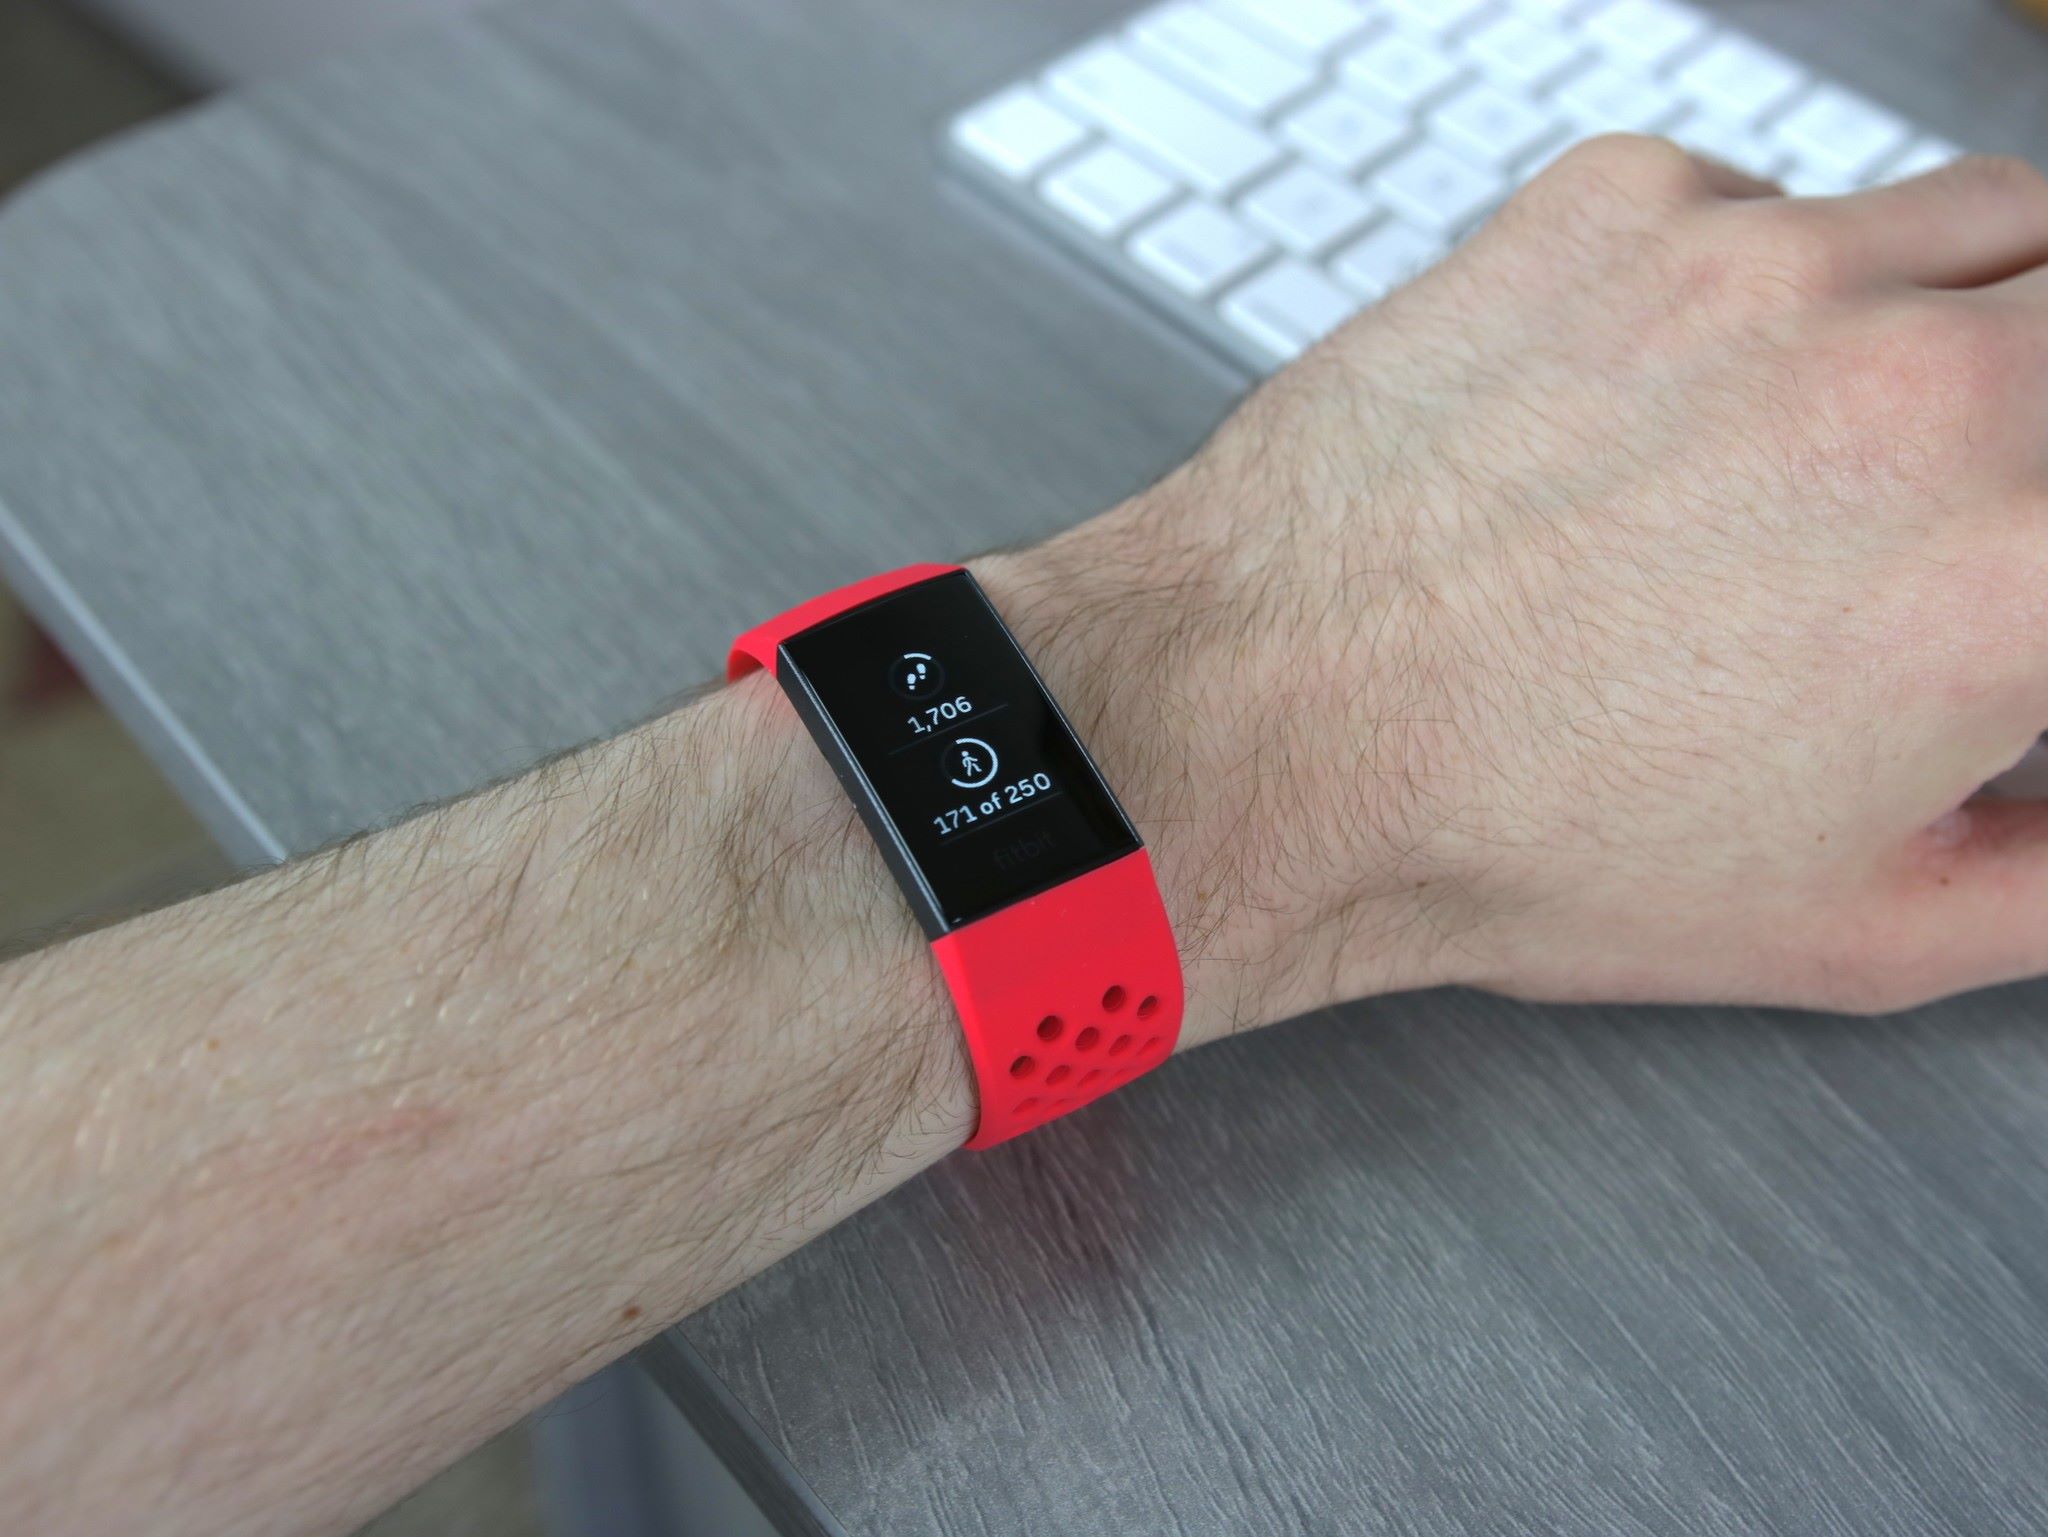 How To Remove Fitness Tracker From Band